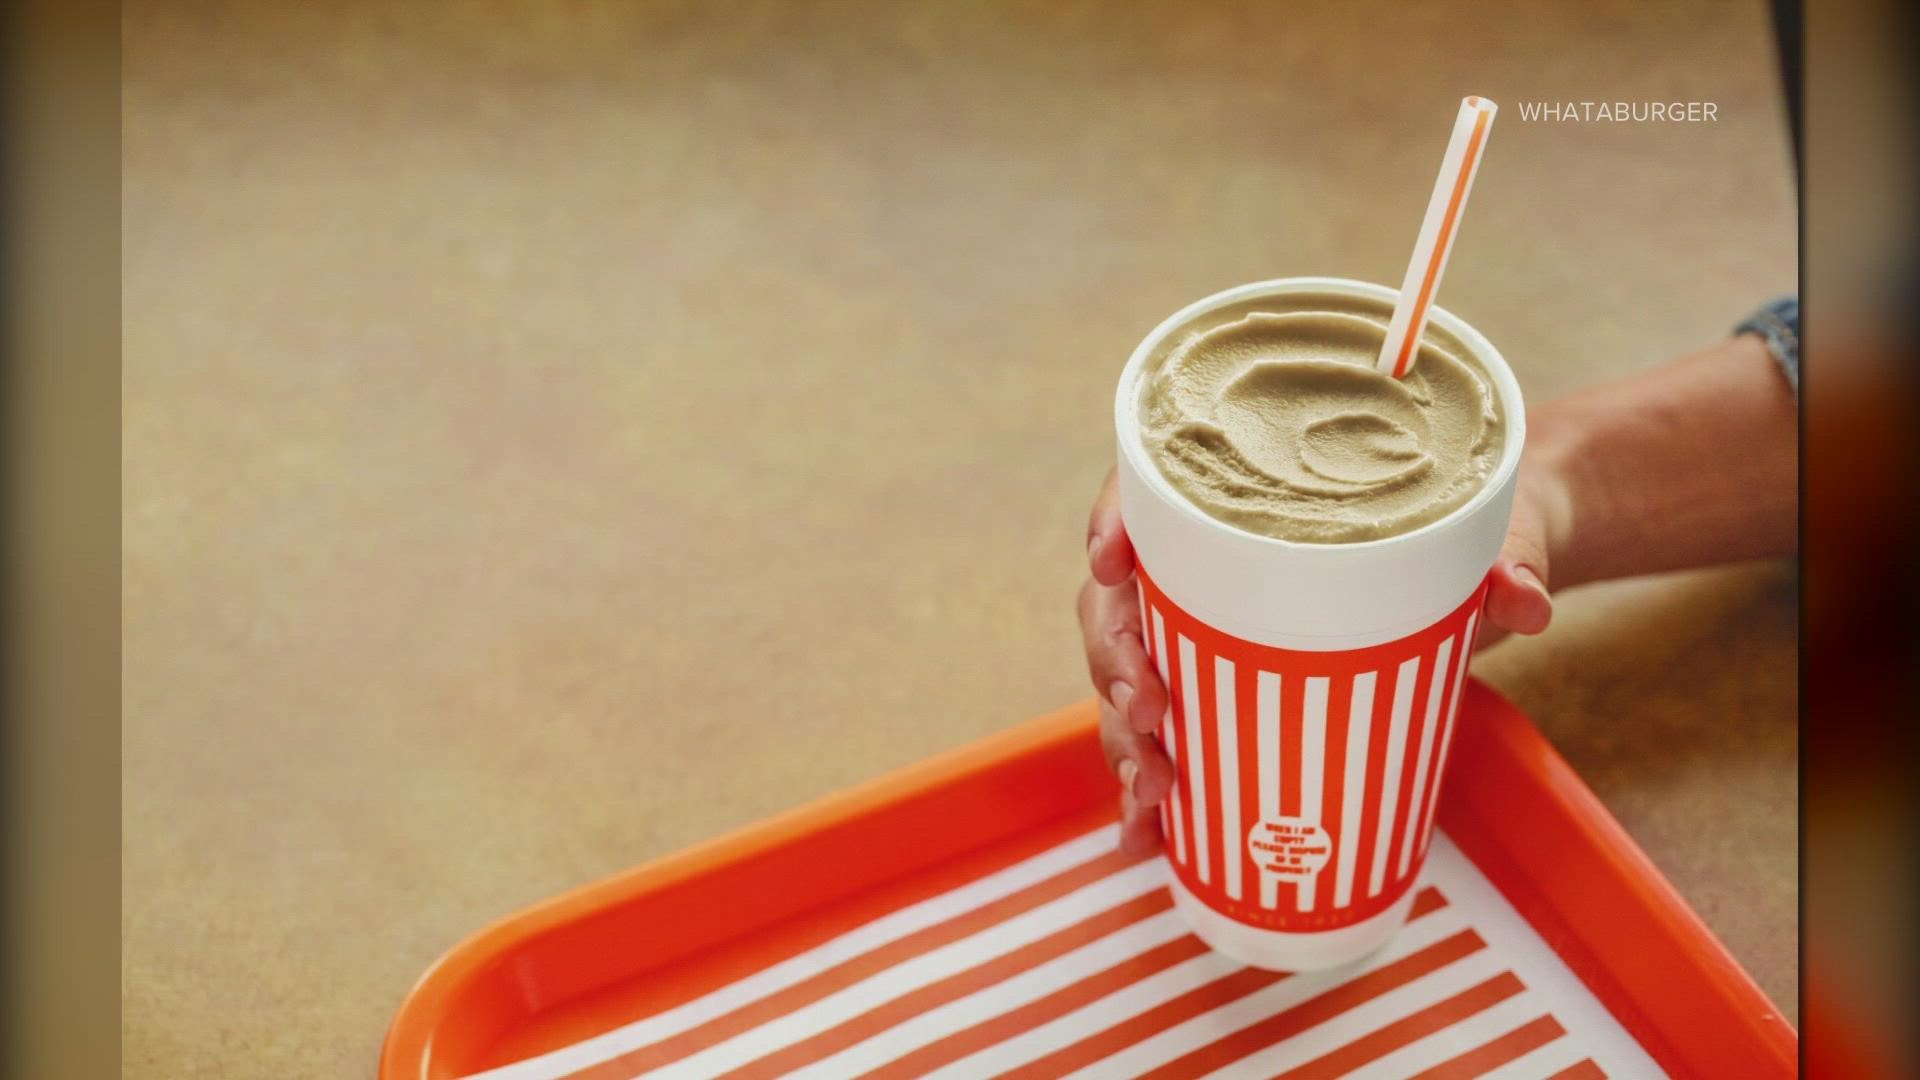 Brought back by popular demand, the Whataburger Dr Pepper Shake is rich, tasty and creamy and made using a vanilla shake base and Dr Pepper syrup, says Whataburger.